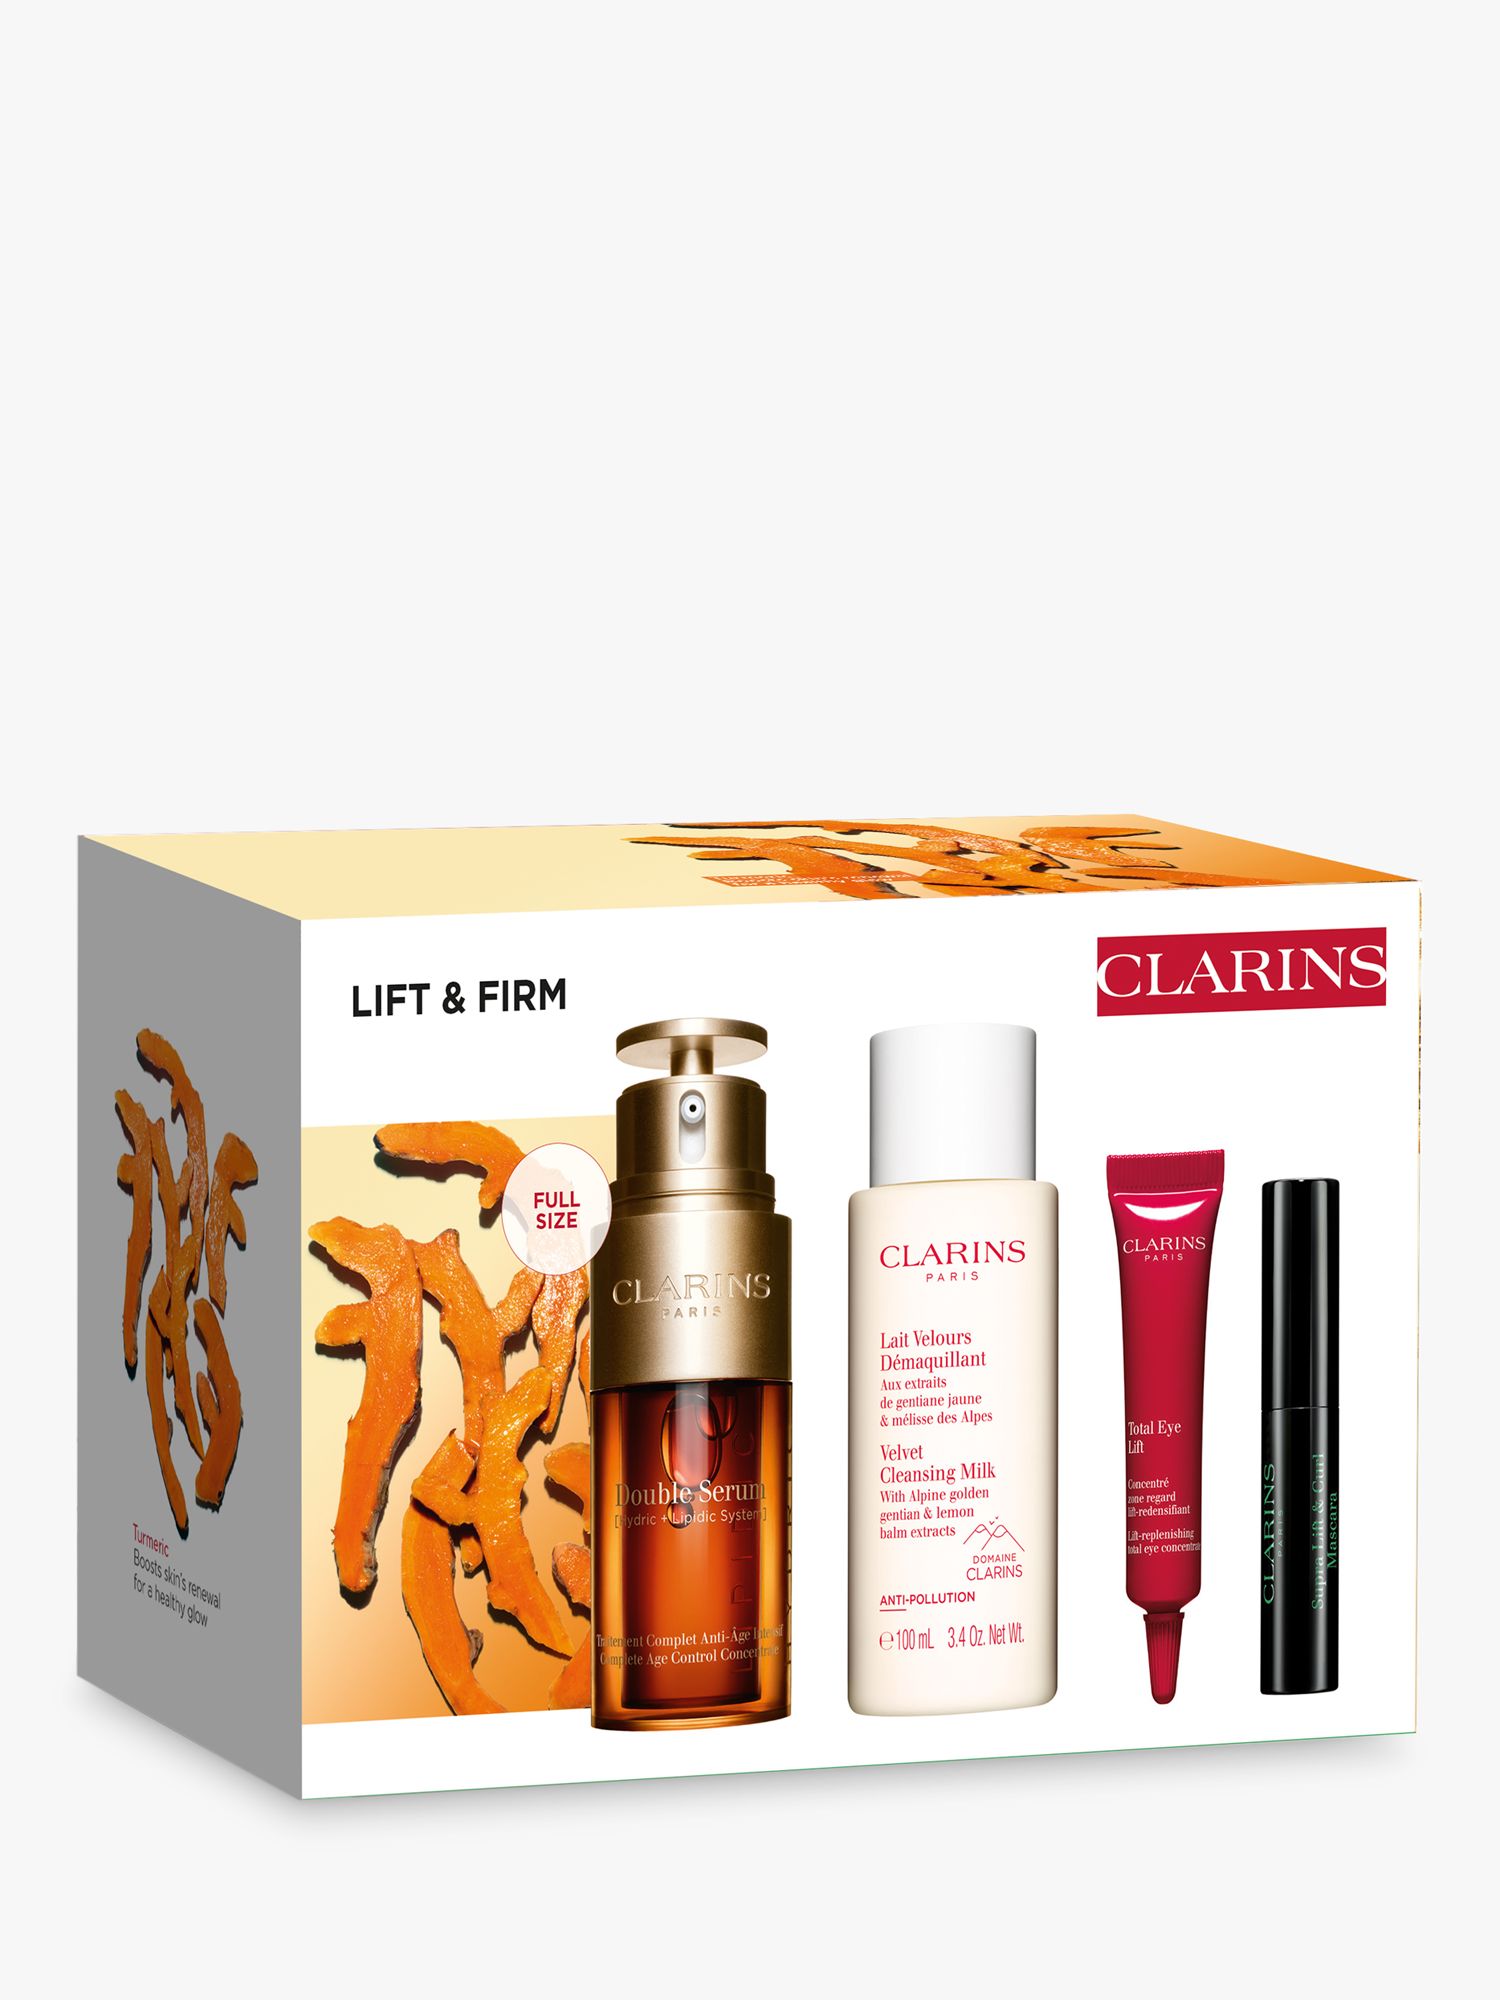 Clarins We Know Skin Lift & Firm Skincare Gift Set 1